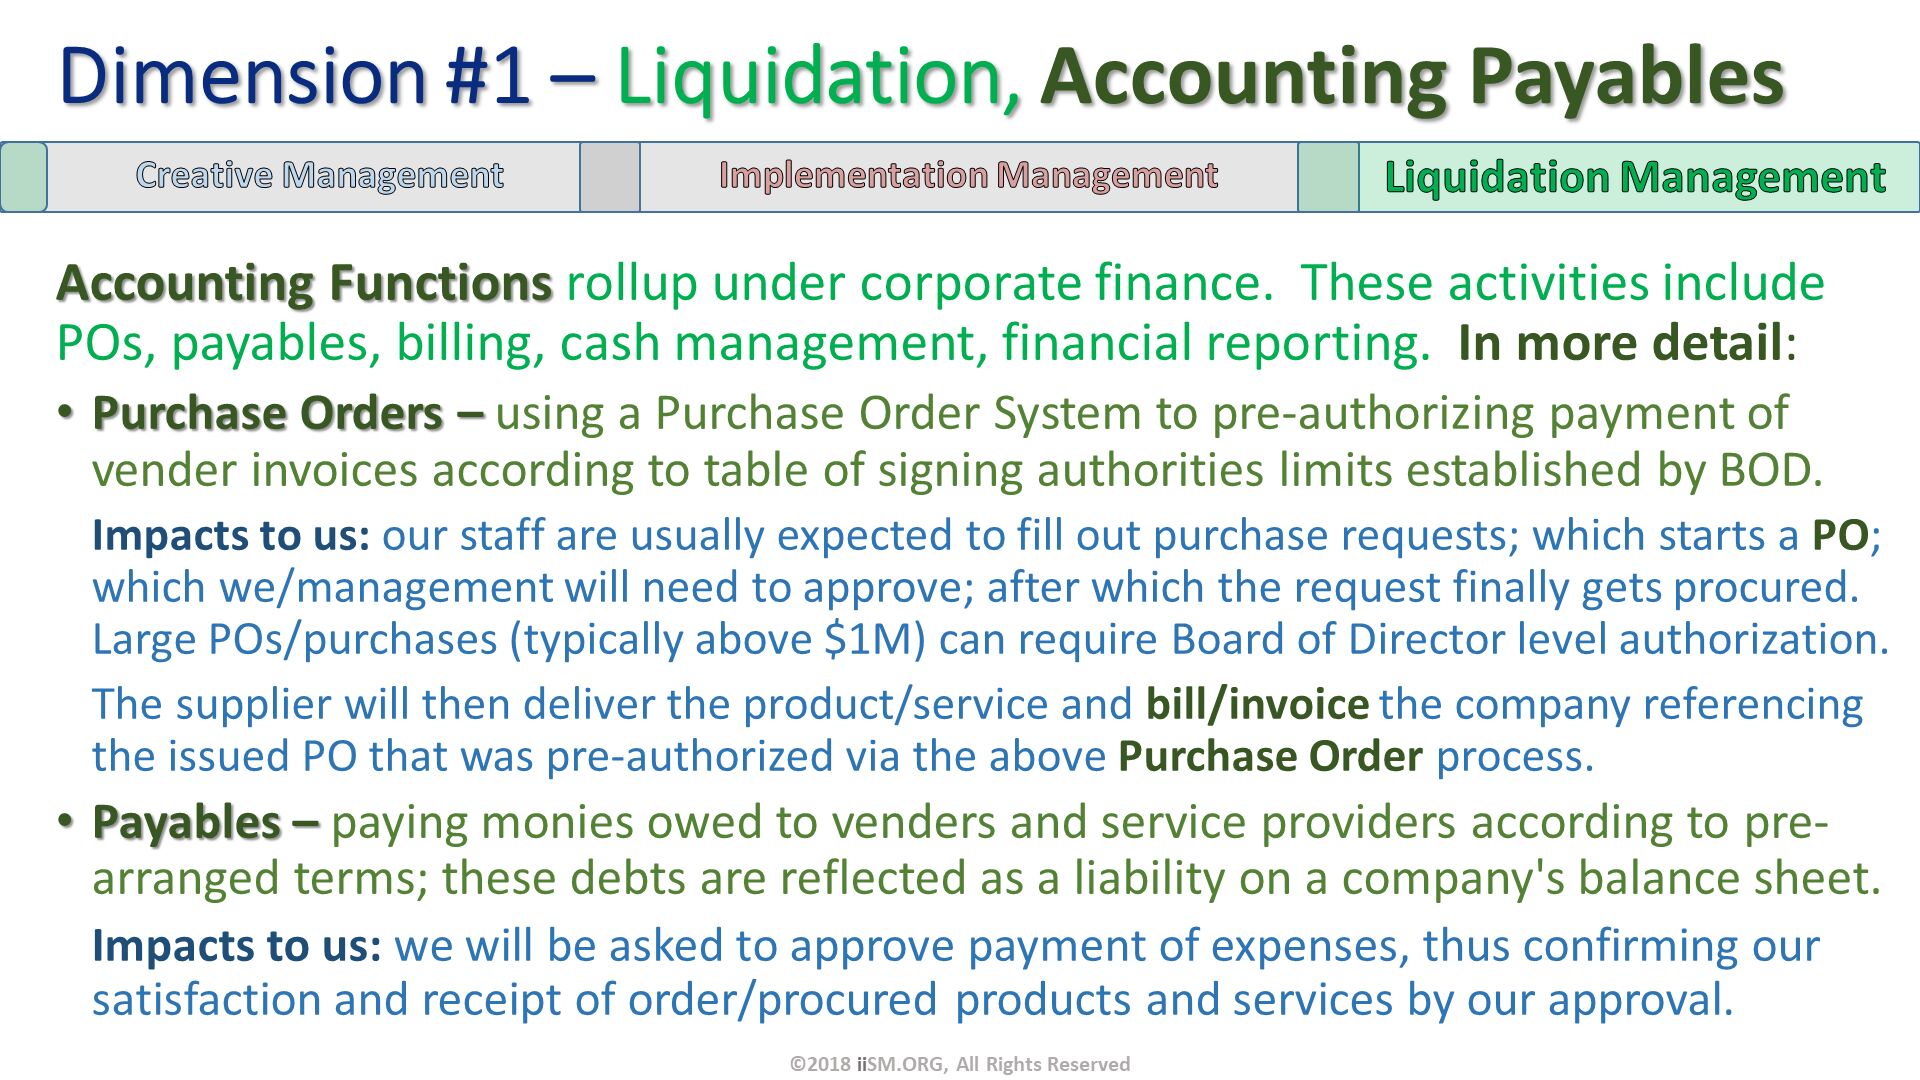 Accounting Functions rollup under corporate finance.  These activities include POs, payables, billing, cash management, financial reporting.  In more detail:
Purchase Orders – using a Purchase Order System to pre-authorizing payment of vender invoices according to table of signing authorities limits established by BOD. 
Impacts to us: our staff are usually expected to fill out purchase requests; which starts a PO; which we/management will need to approve; after which the request finally gets procured. Large POs/purchases (typically above $1M) can require Board of Director level authorization.  The supplier will then deliver the product/service and bill/invoice the company referencing the issued PO that was pre-authorized via the above Purchase Order process.
Payables – paying monies owed to venders and service providers according to pre-arranged terms; these debts are reflected as a liability on a company's balance sheet.
Impacts to us: we will be asked to approve payment of expenses, thus confirming our satisfaction and receipt of order/procured products and services by our approval. 
. Dimension #1 – Liquidation, Accounting Payables. ©2018 iiSM.ORG, All Rights Reserved. 